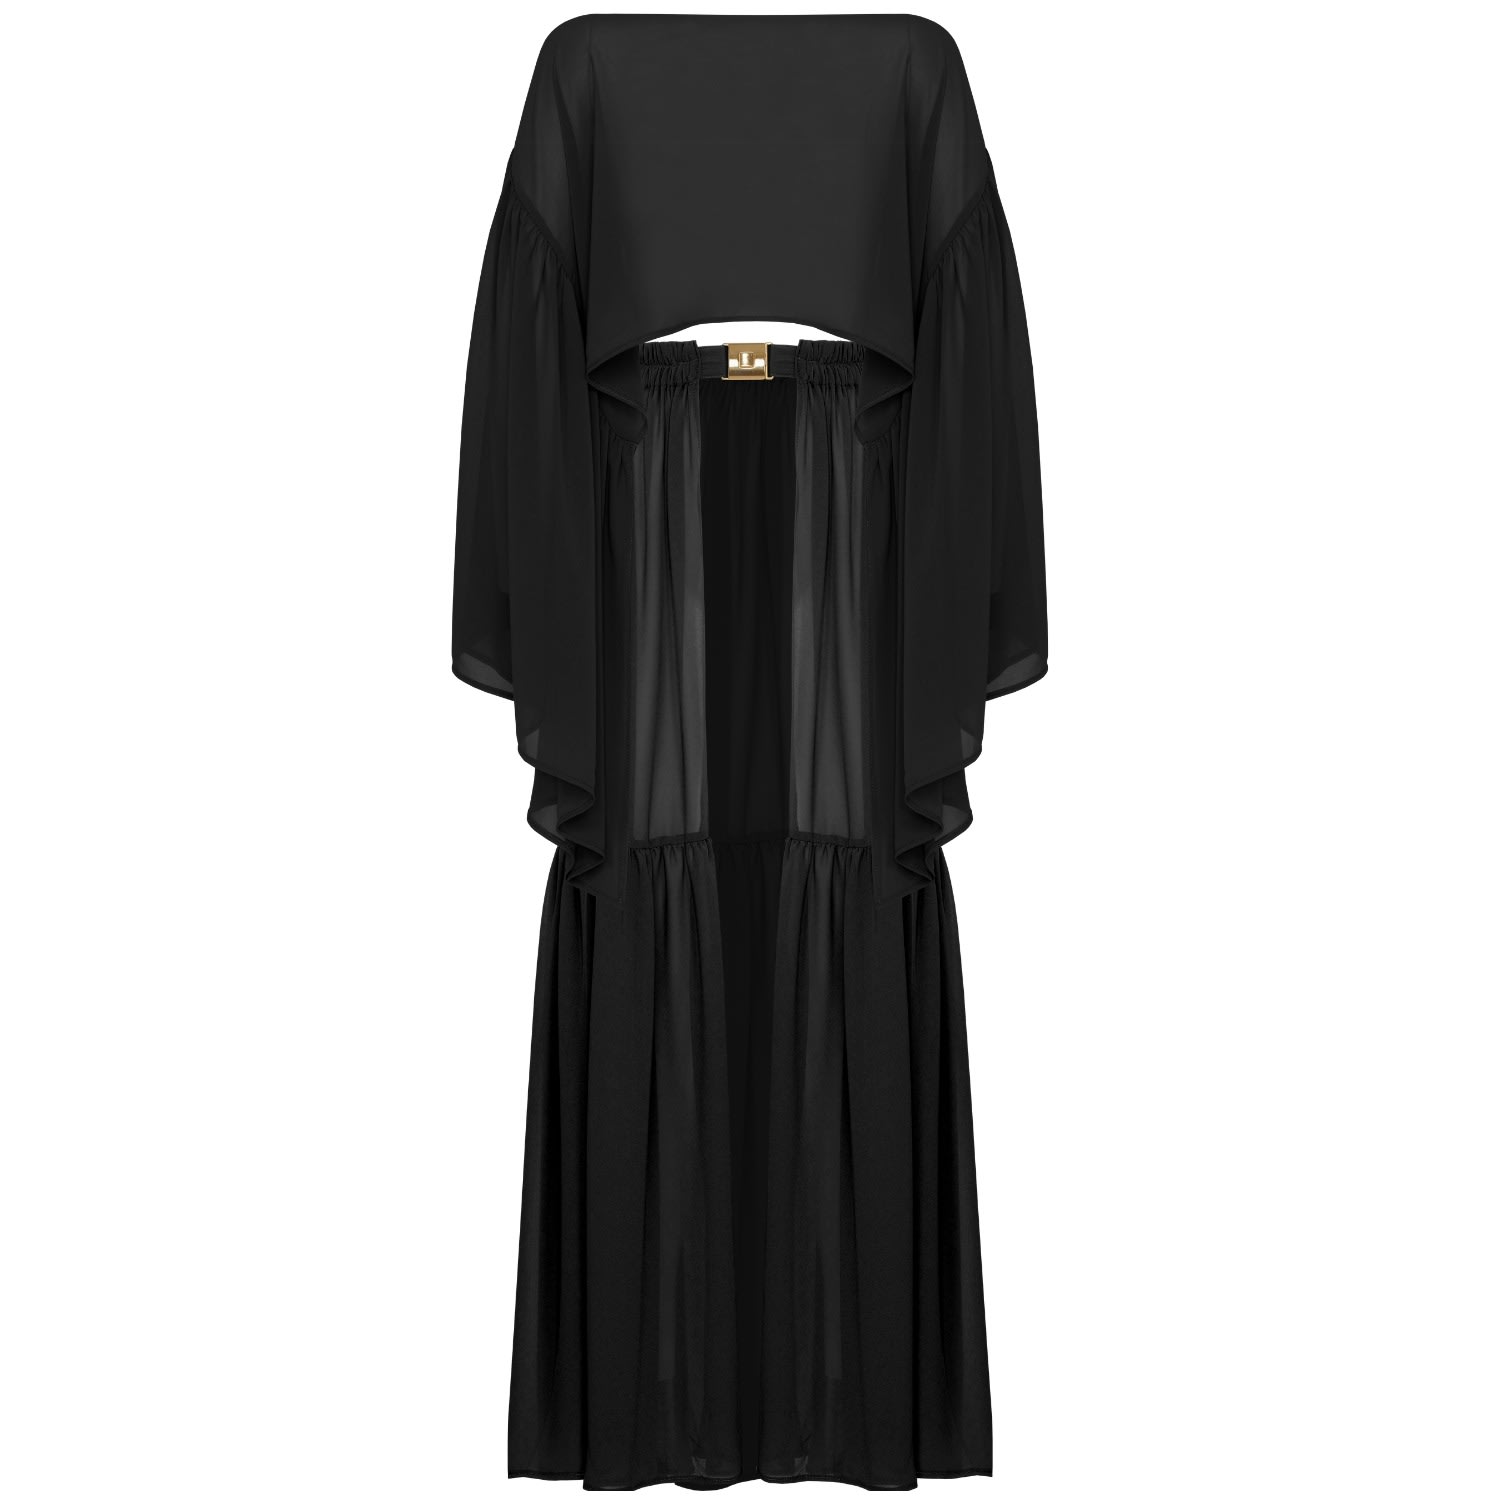 Women's Comely Beach Cover-Up In Black Xs/S ANTONINIAS